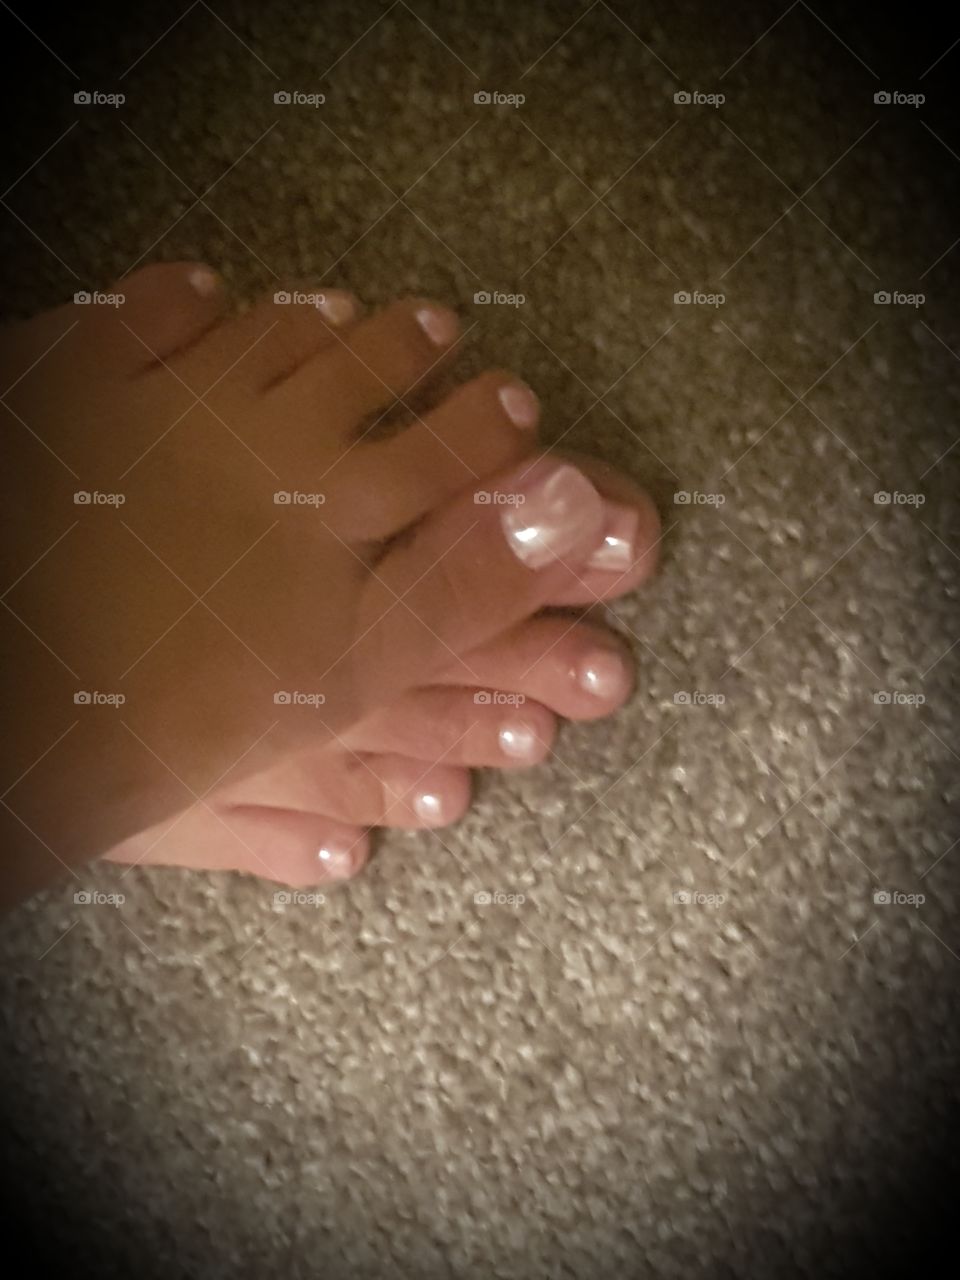 It's all about the #toes #toefetish #barefeet